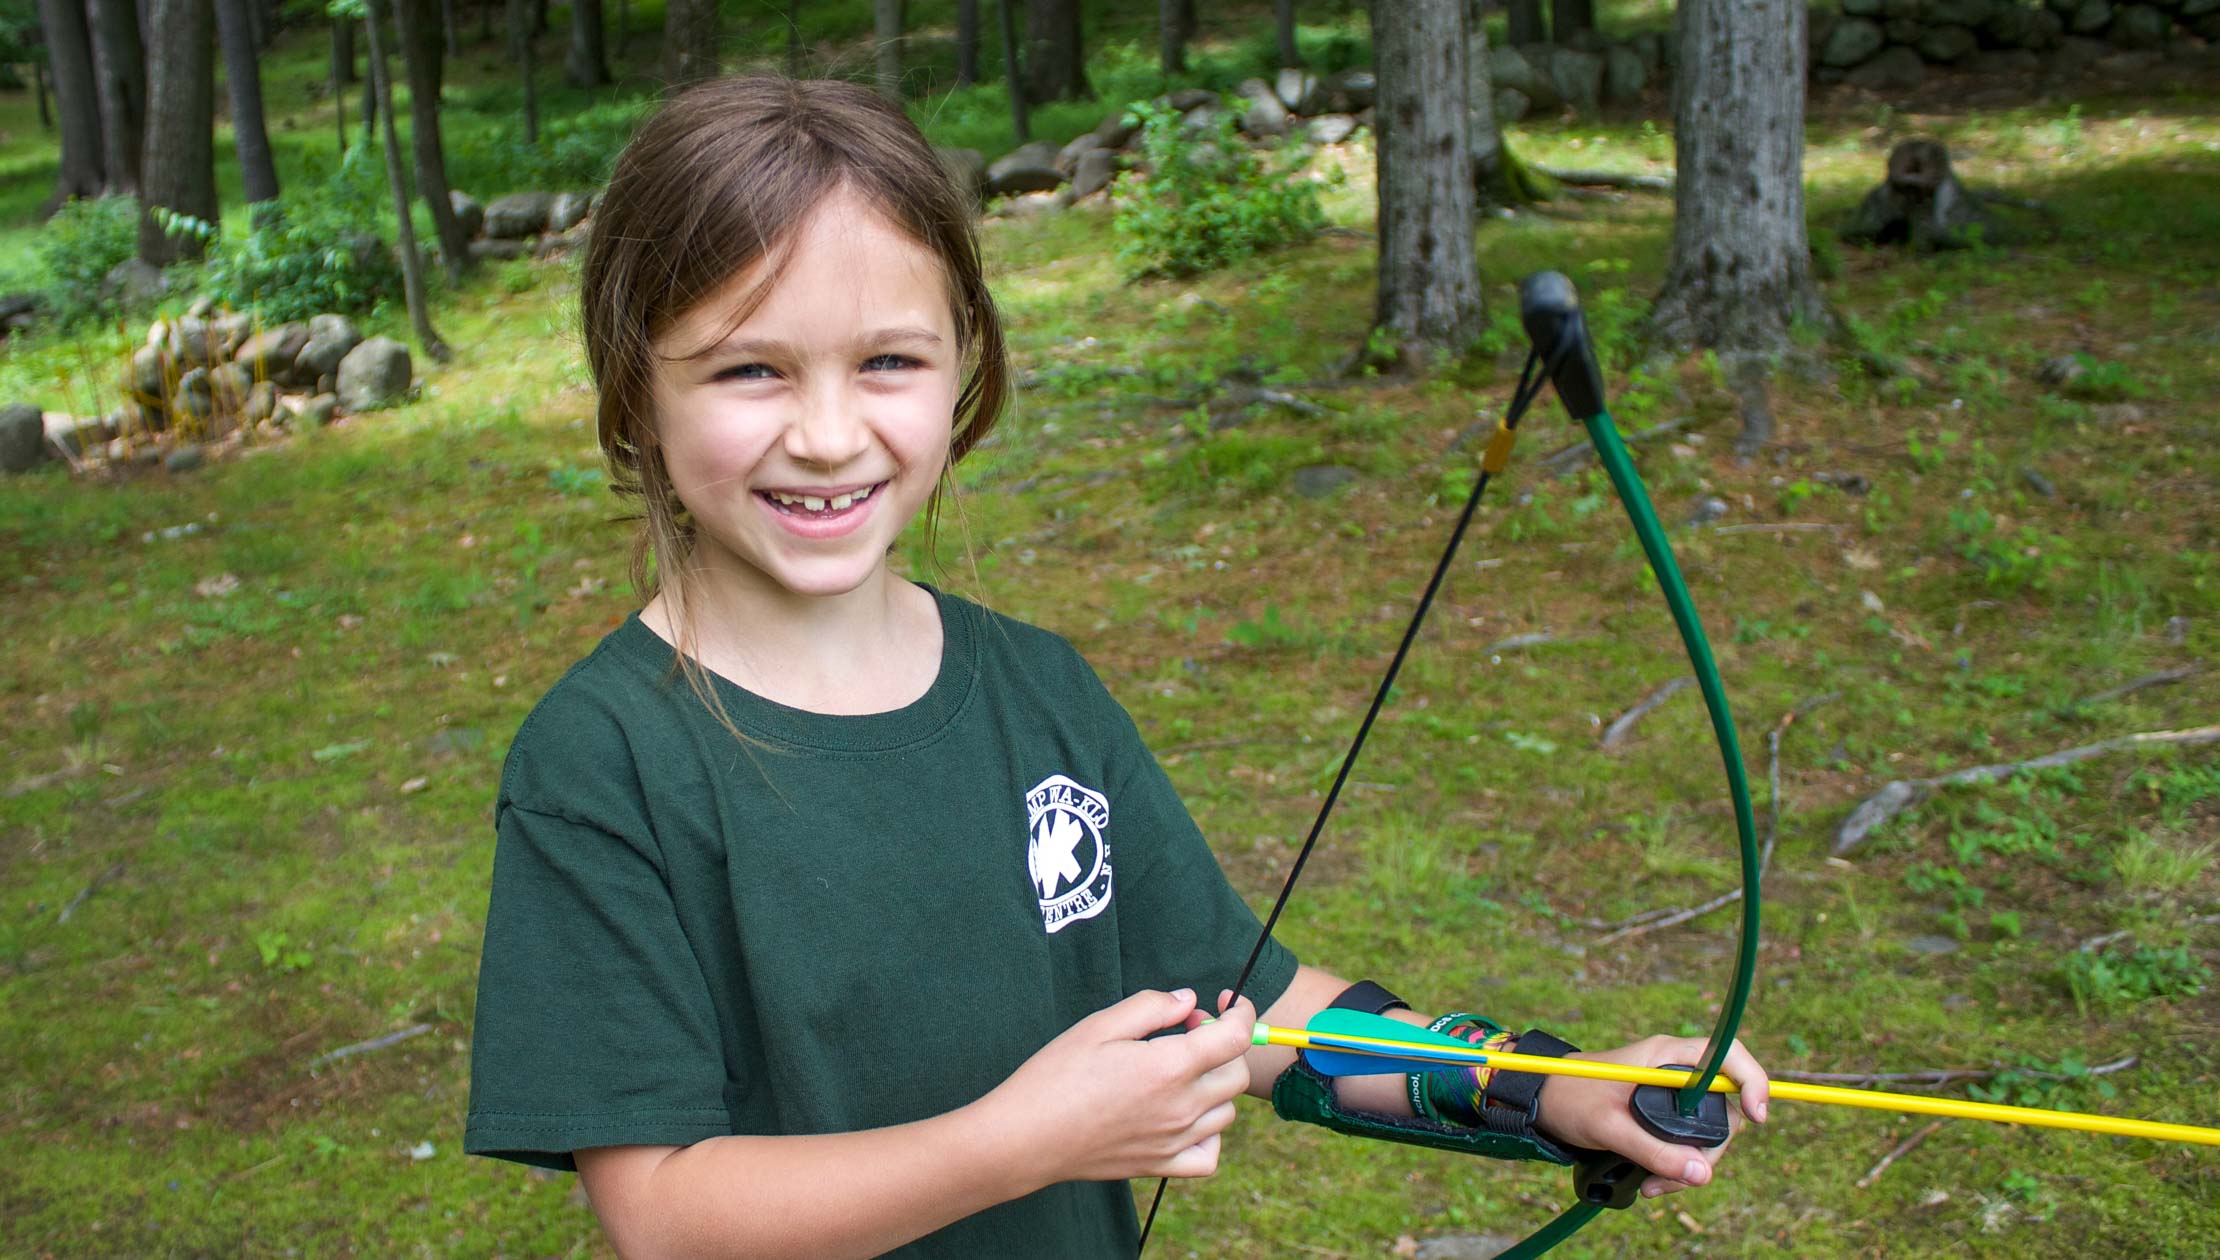 Young camper at archery